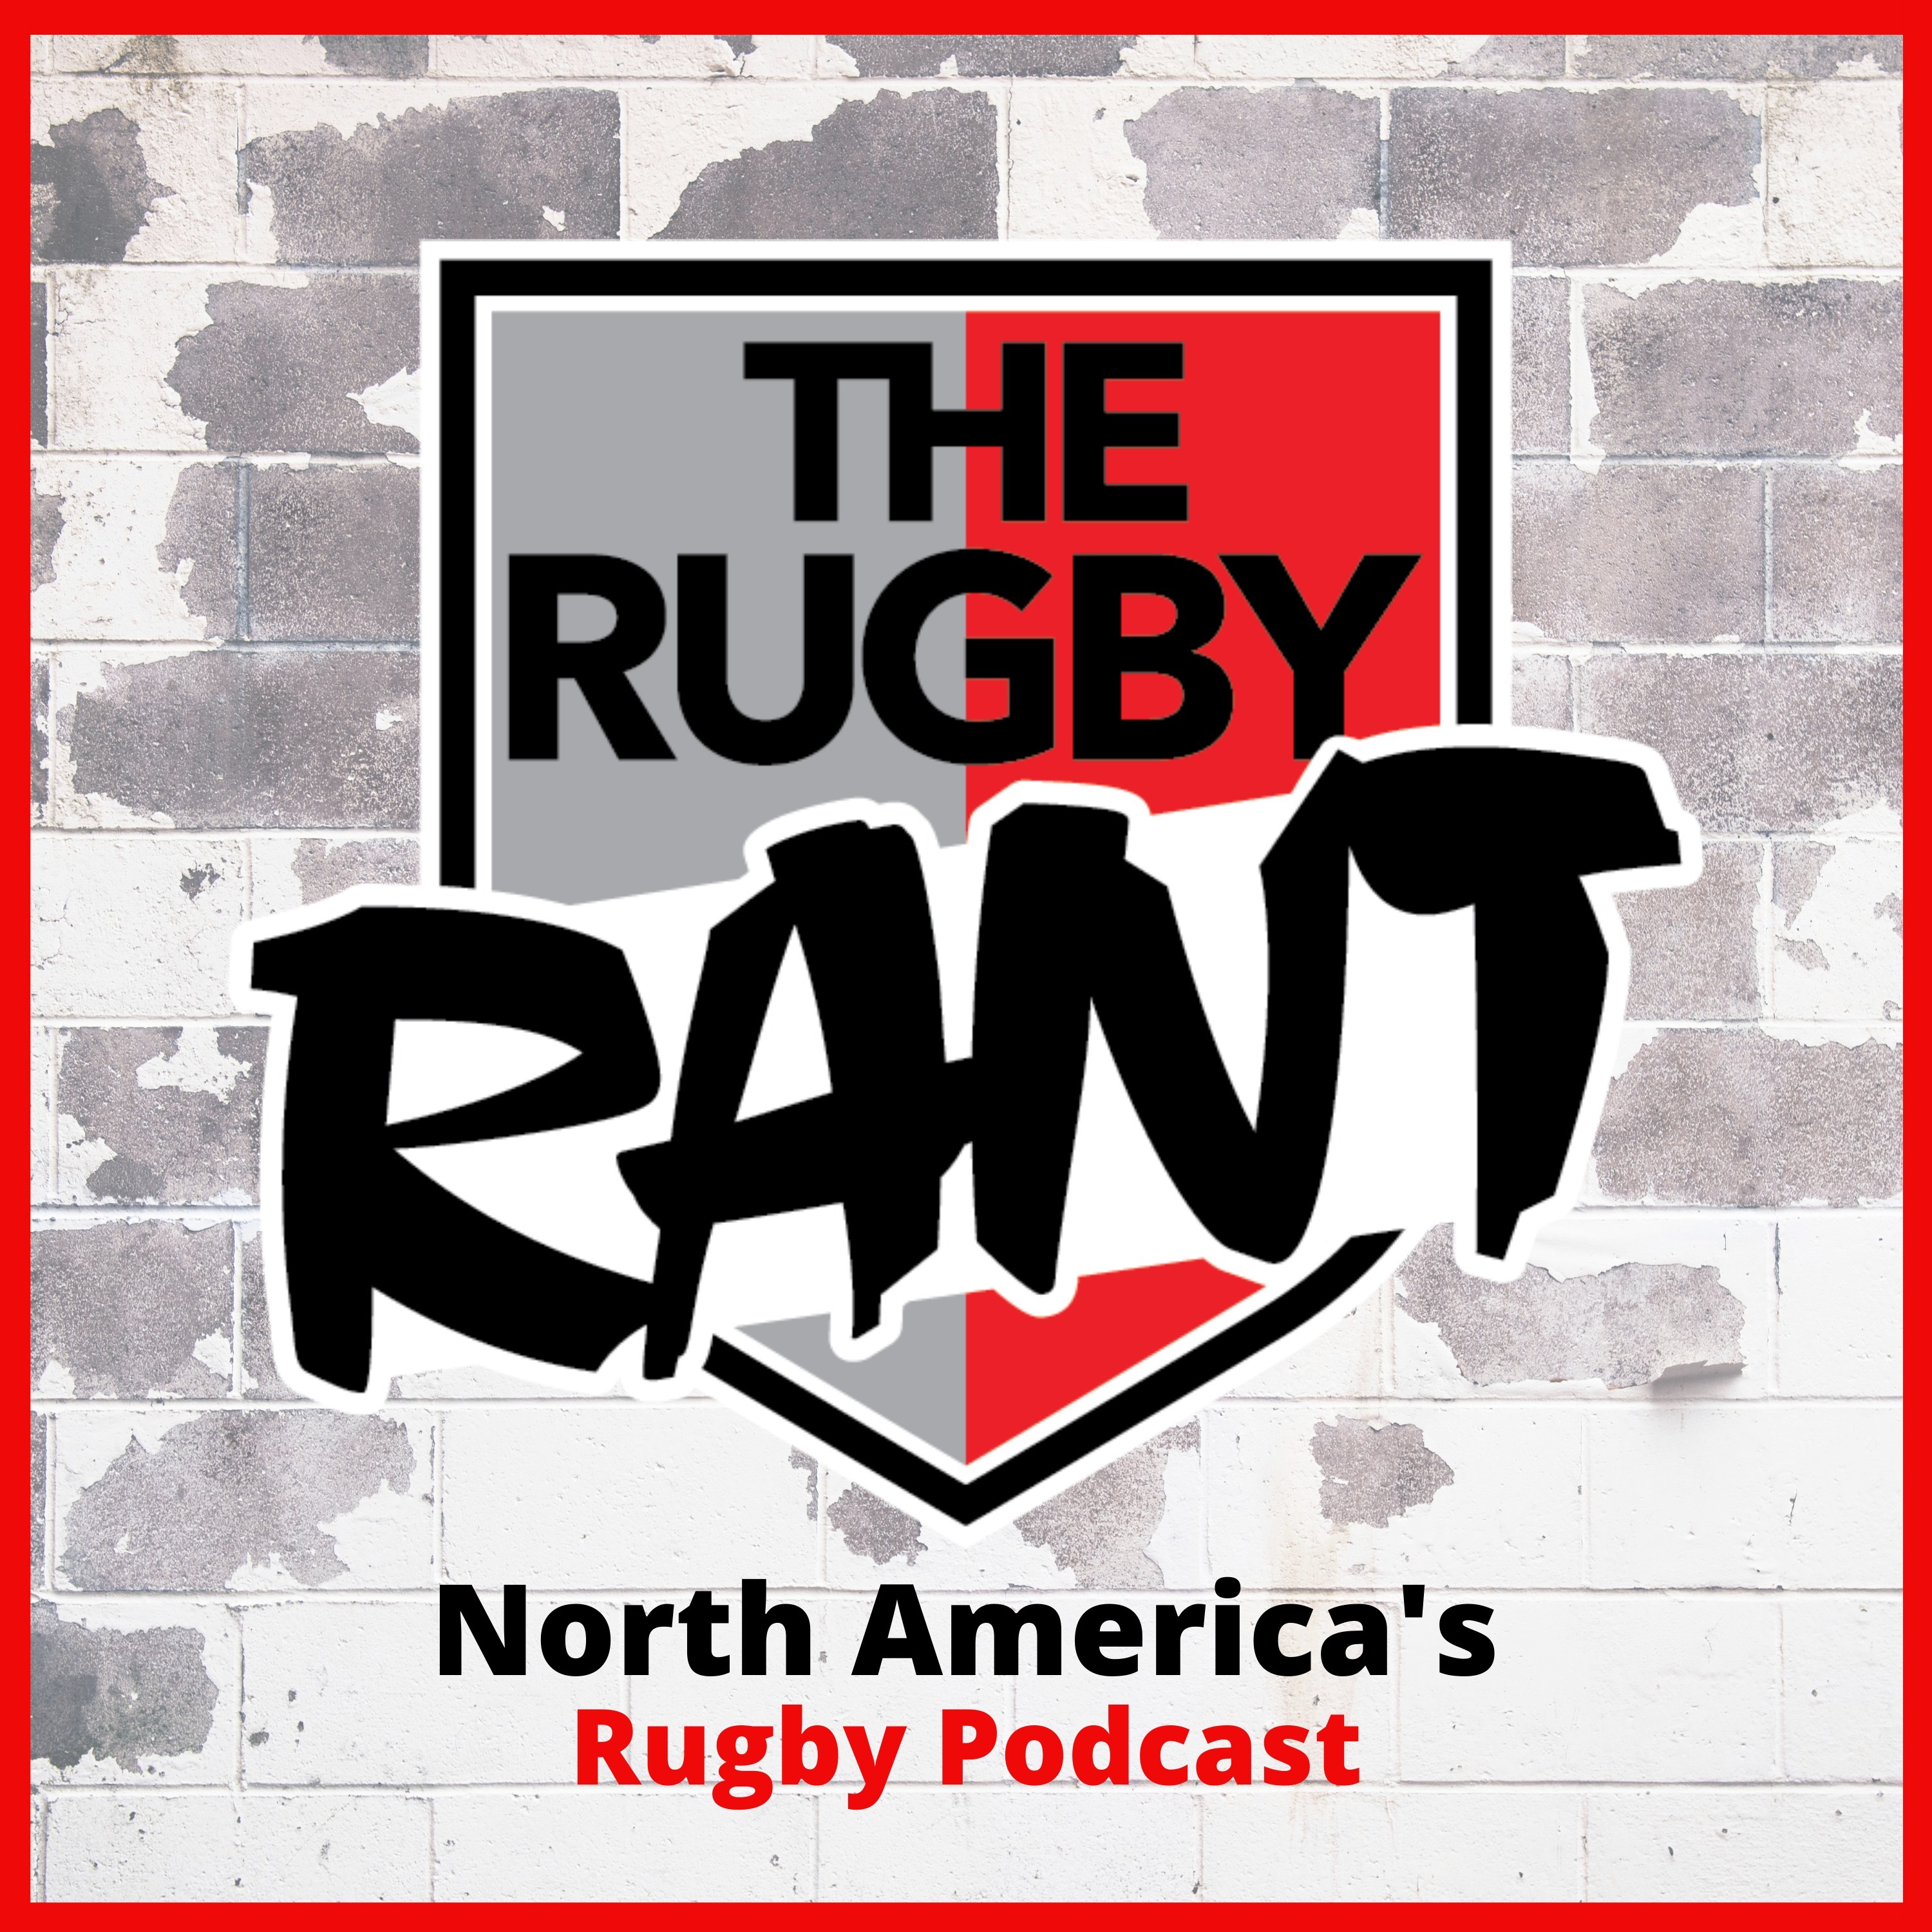 The Rugby Rant - Run, Pass or Kick with Kyle Rogers